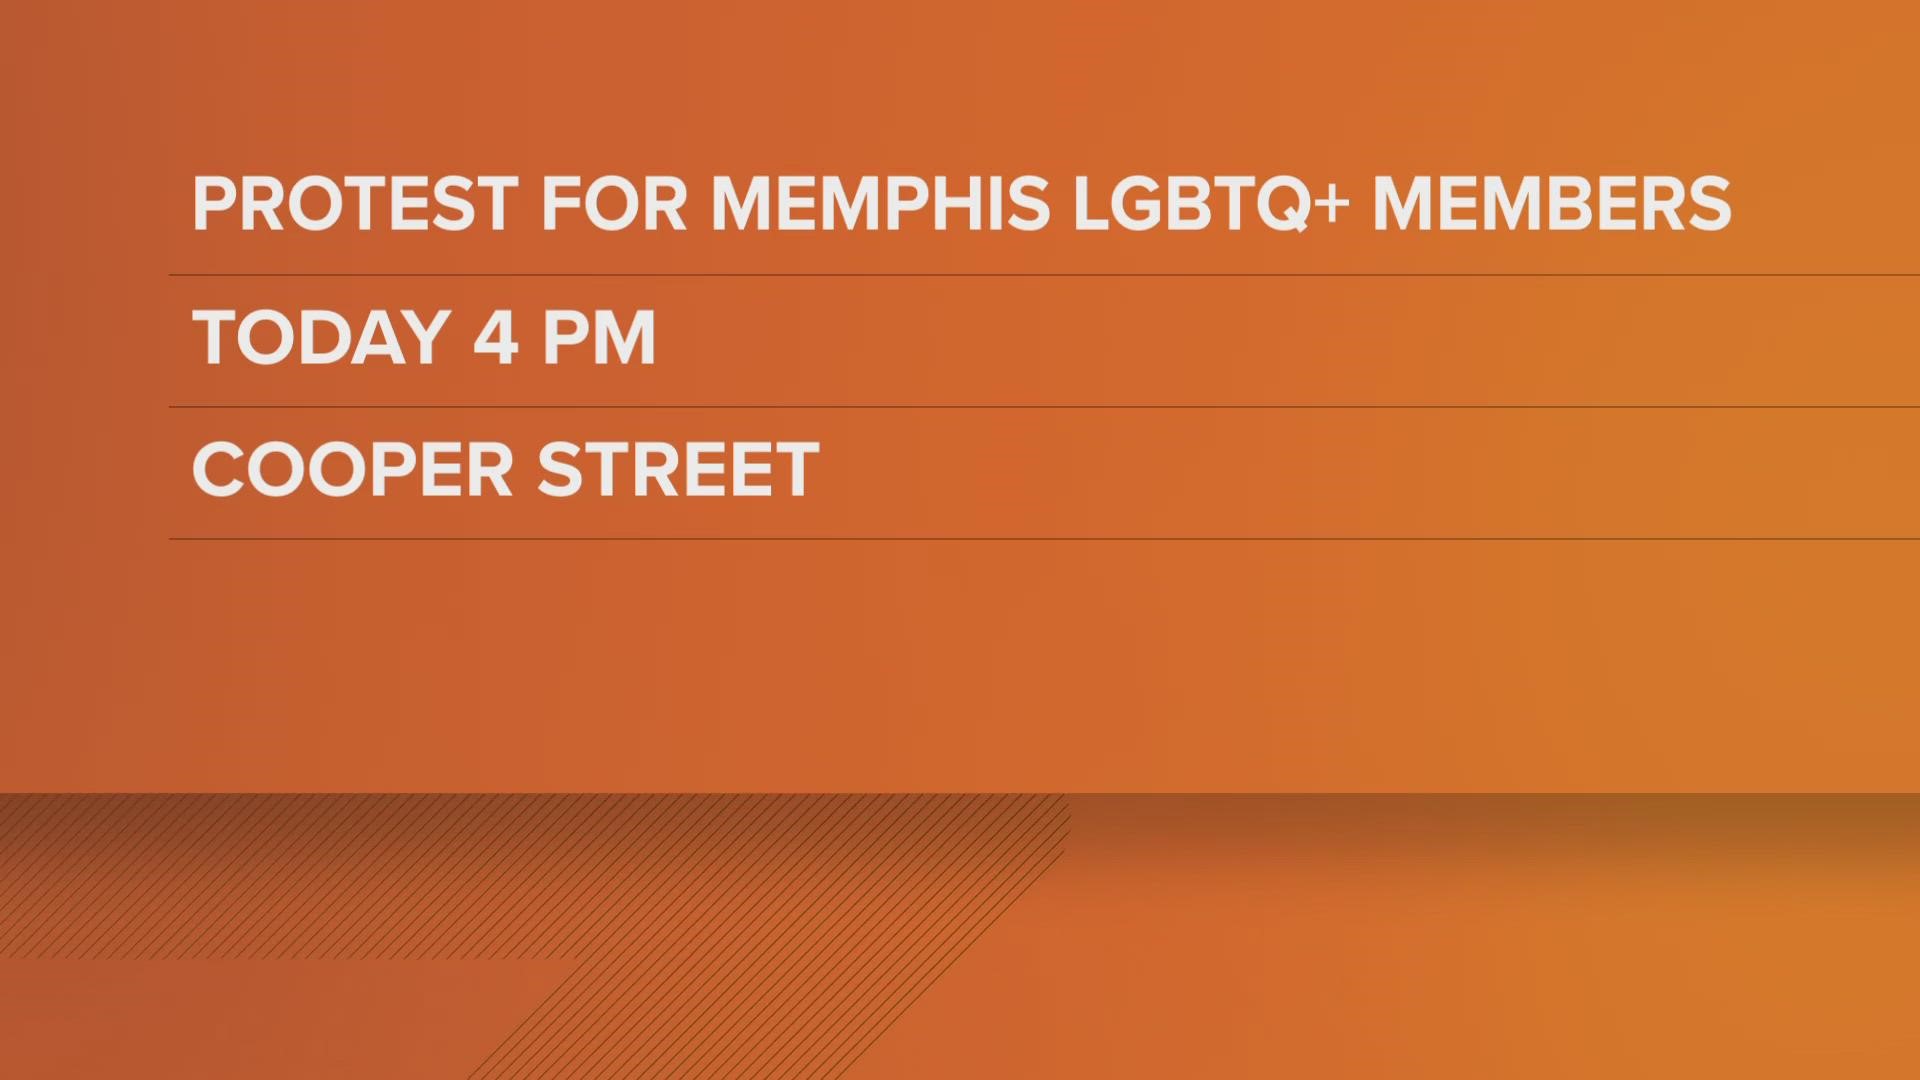 OUTMemphis said the bill, as well as other new legislations moving through Tennessee government, targets the LGBTQIA+ community.